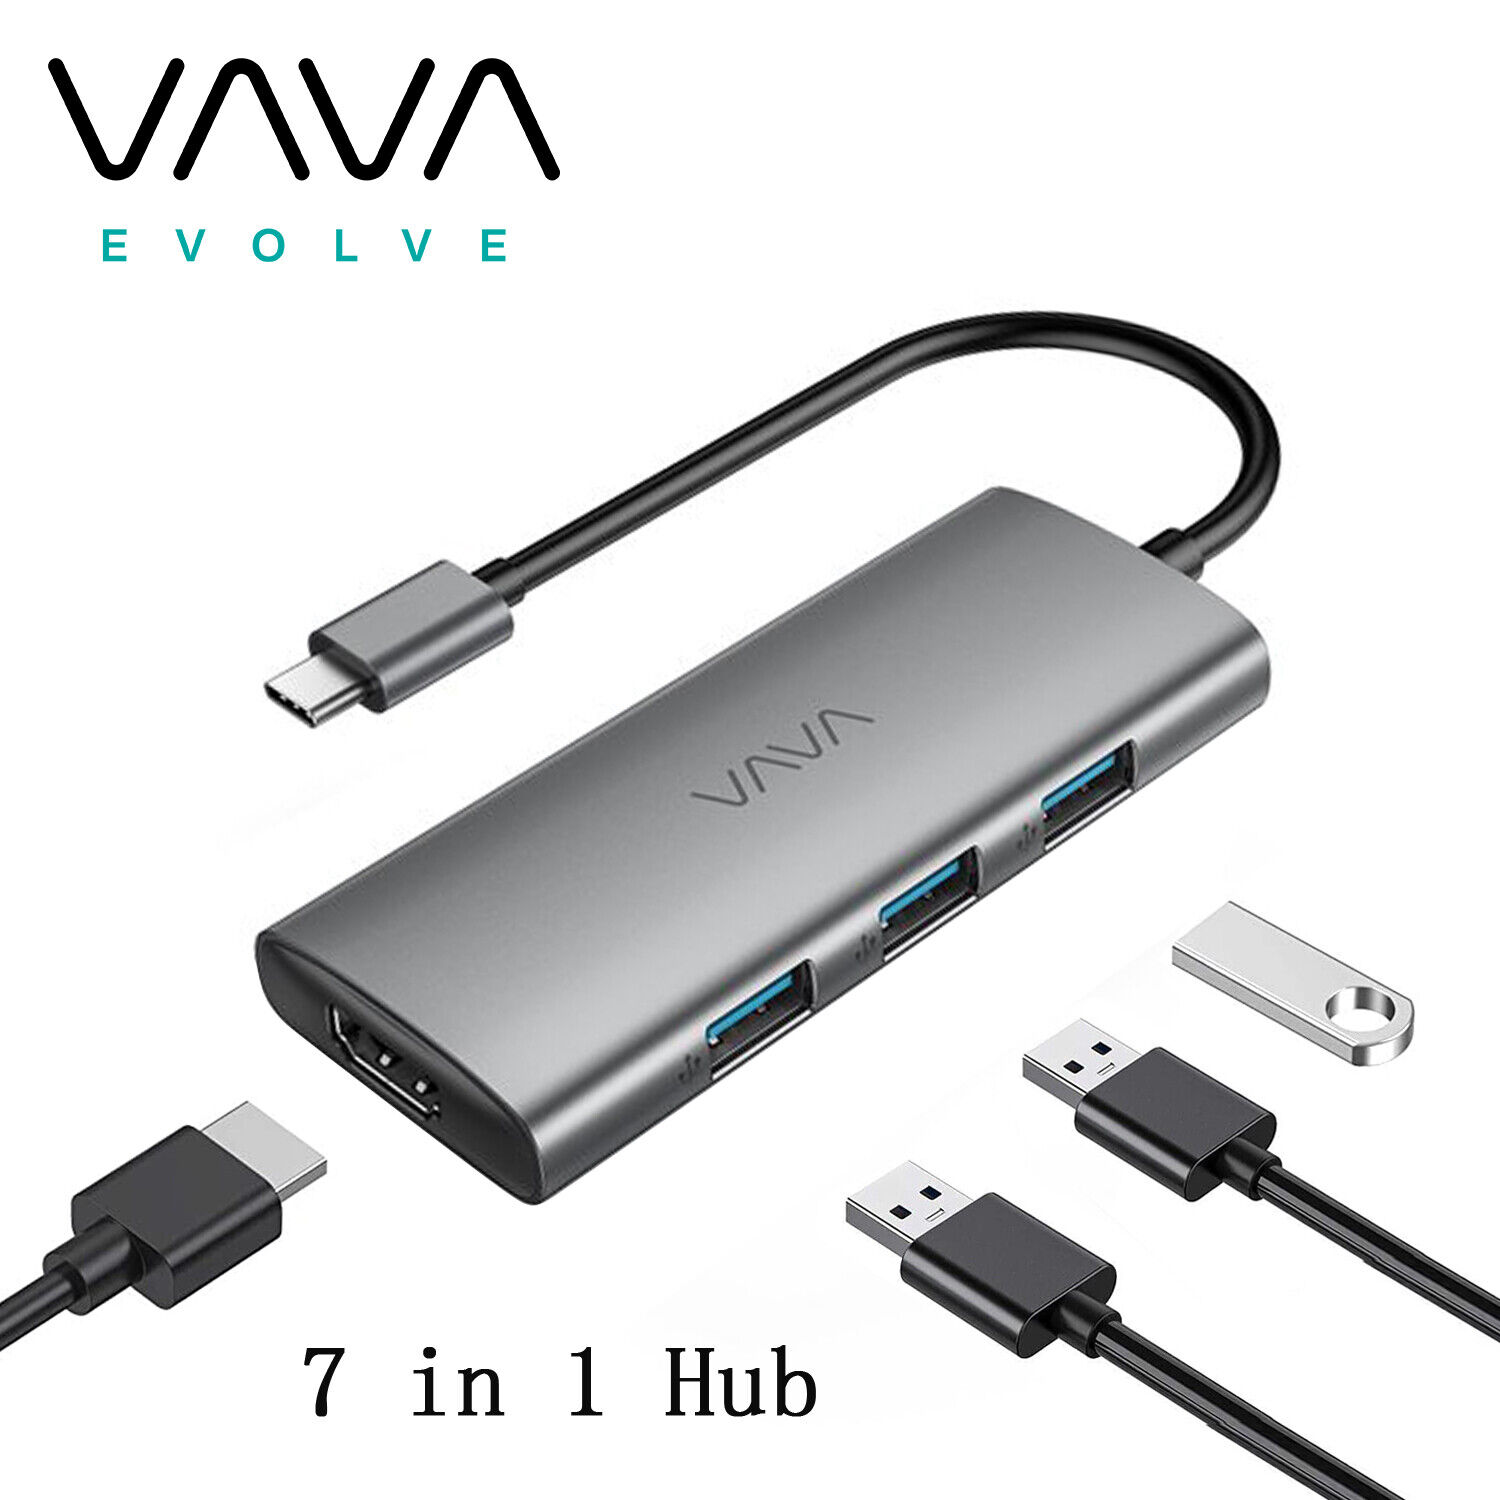 VAVA 7 in 1 USB-C Hub Type C To USB 3.0 4K HDMI Adapter For Macbook Pro/Air